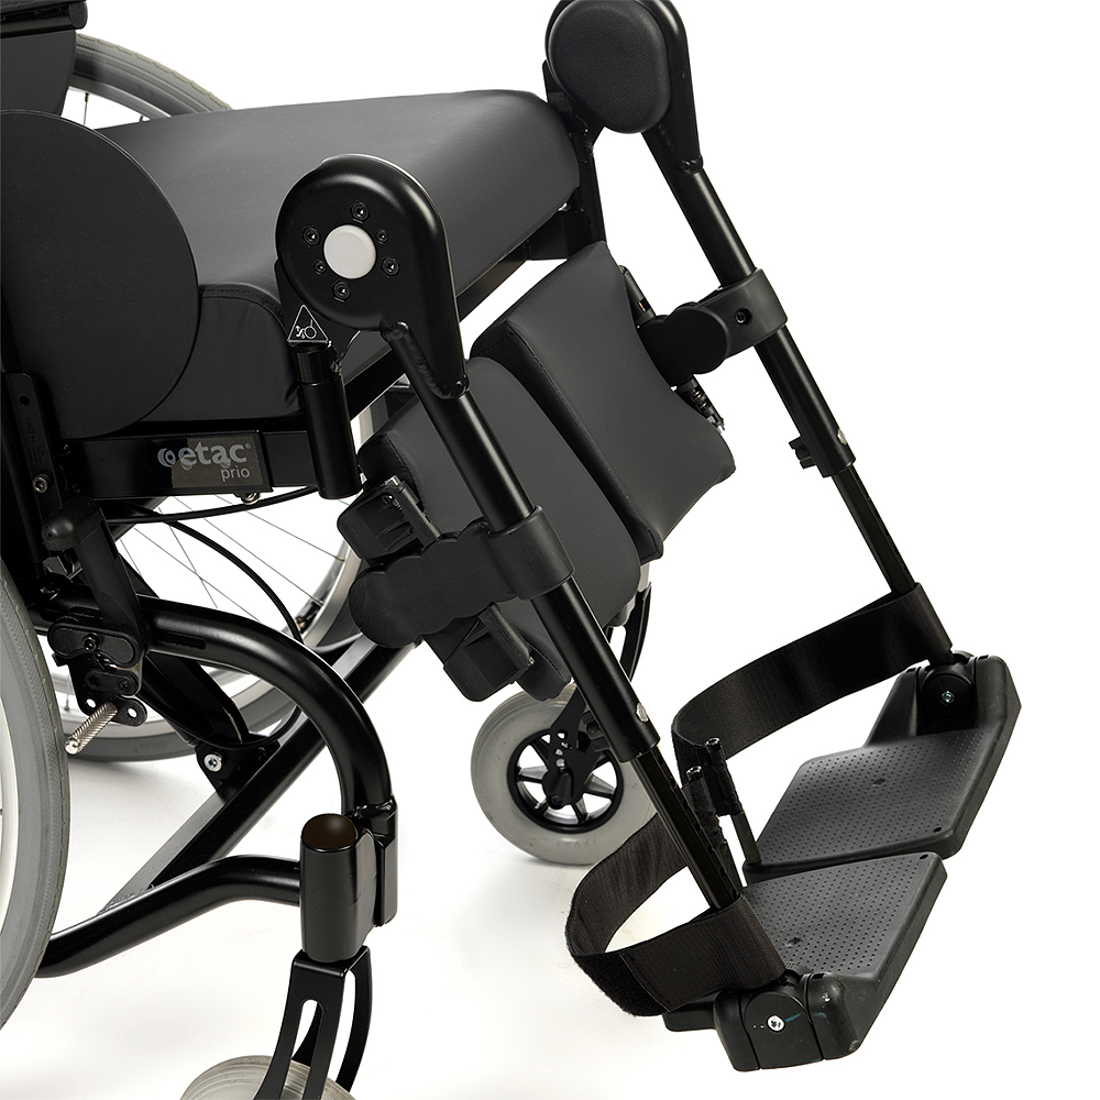 etac-prio-update-wheelchair-leg-supports-elevating_1000x1000.png